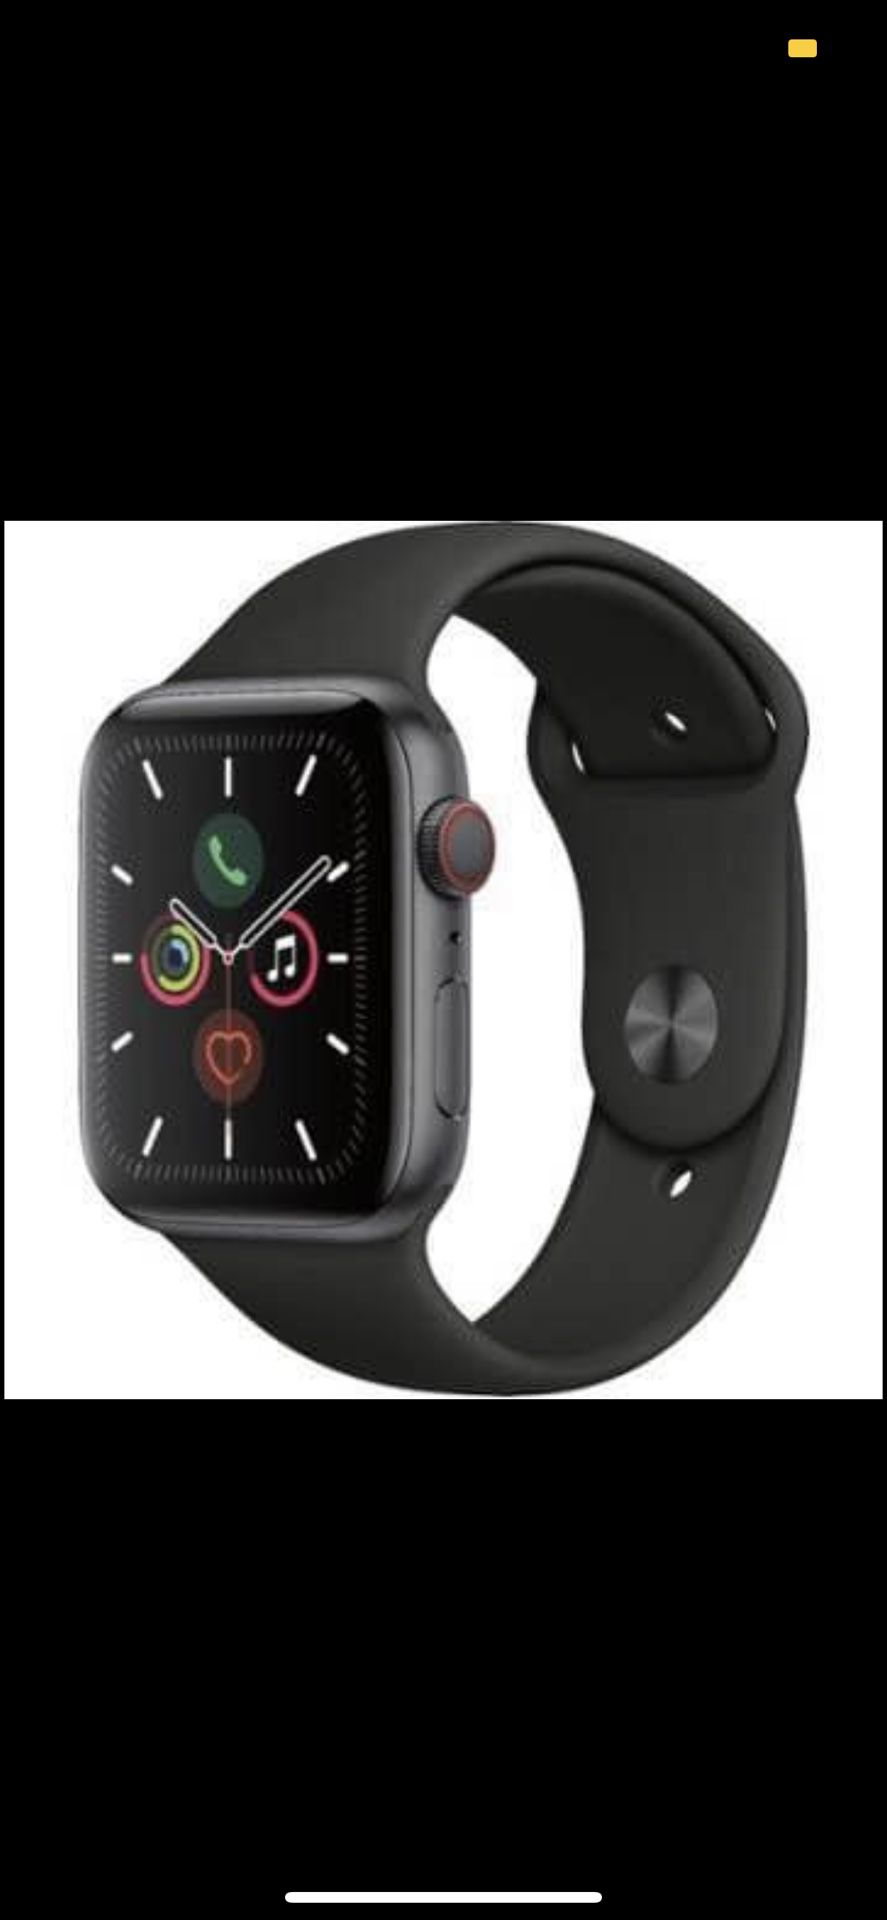 Apple Watch Series 5 (GPS + Cellular) 44mm Space Gray Aluminum Case with Black Sport Band - Space Gr